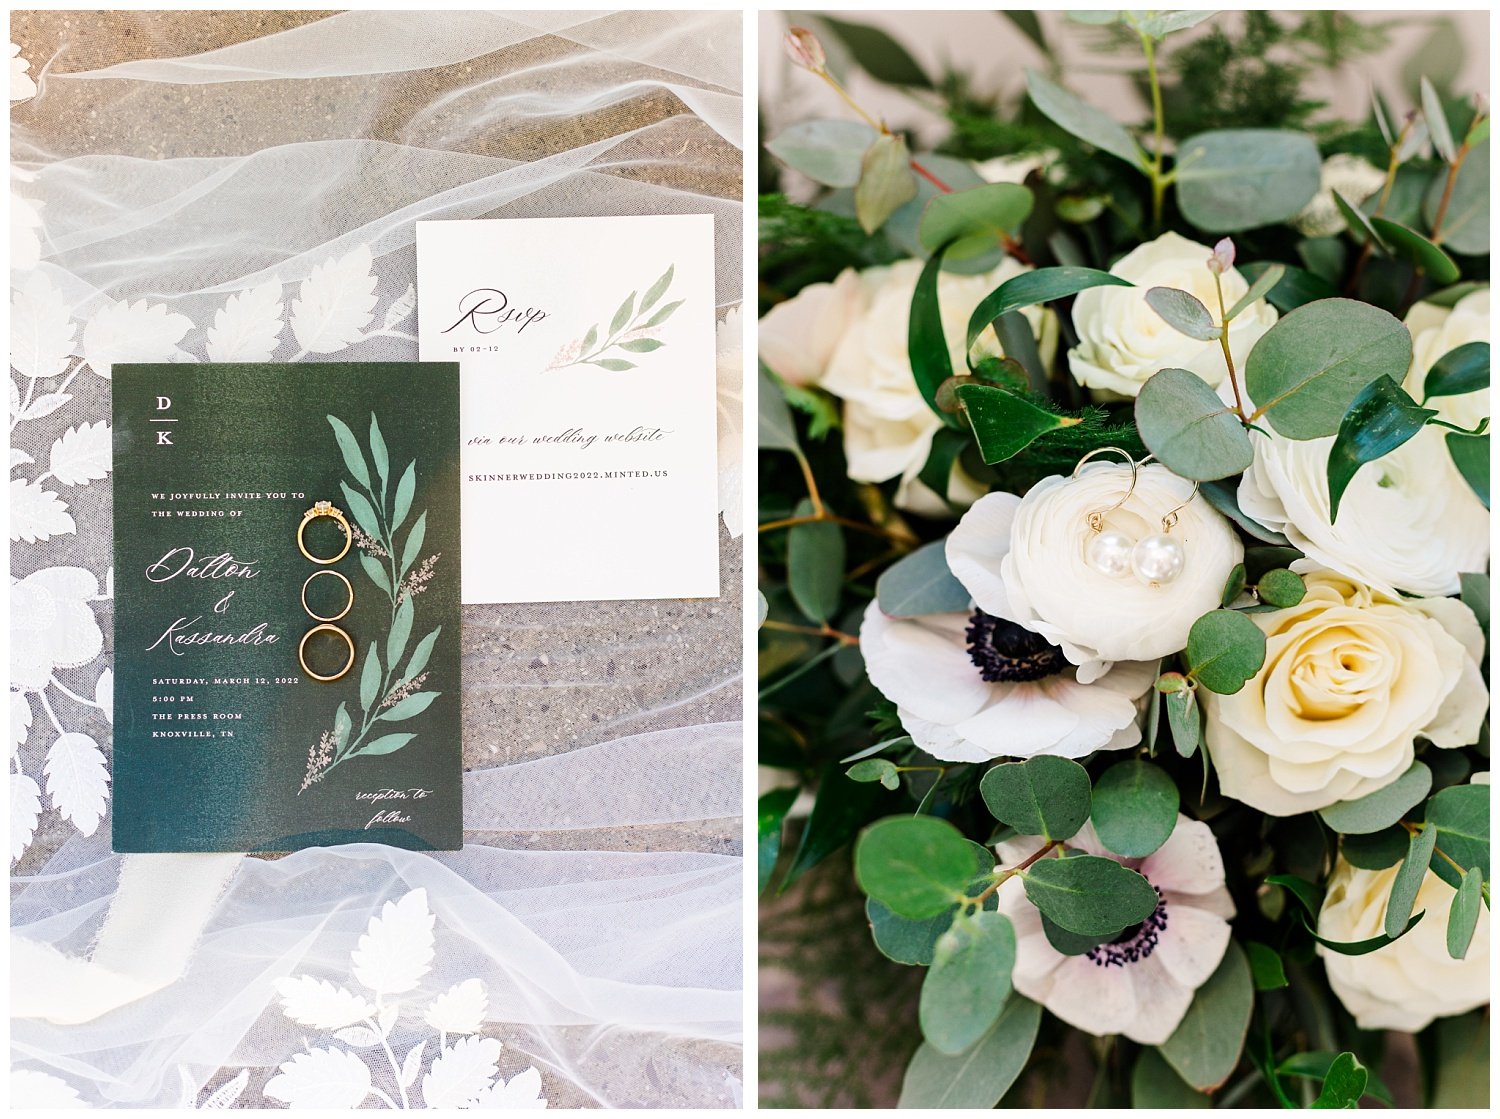 wedding invitation and flowers at Knoxville venue